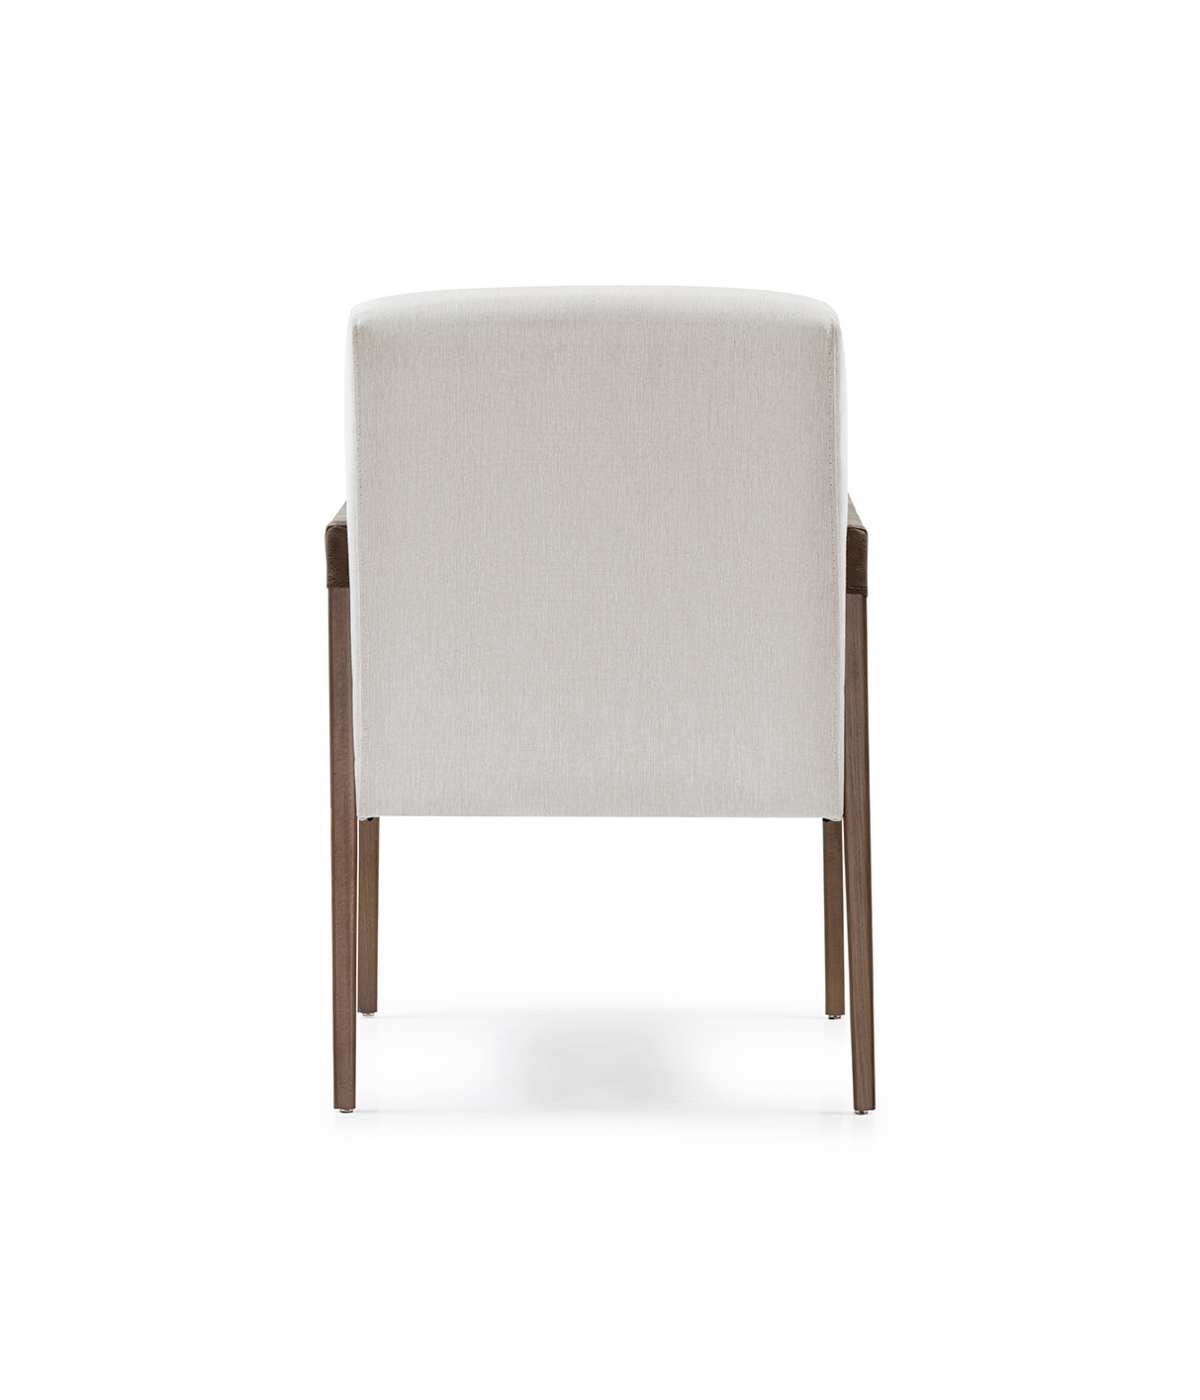 Back View Anah Dining Chair - Cream